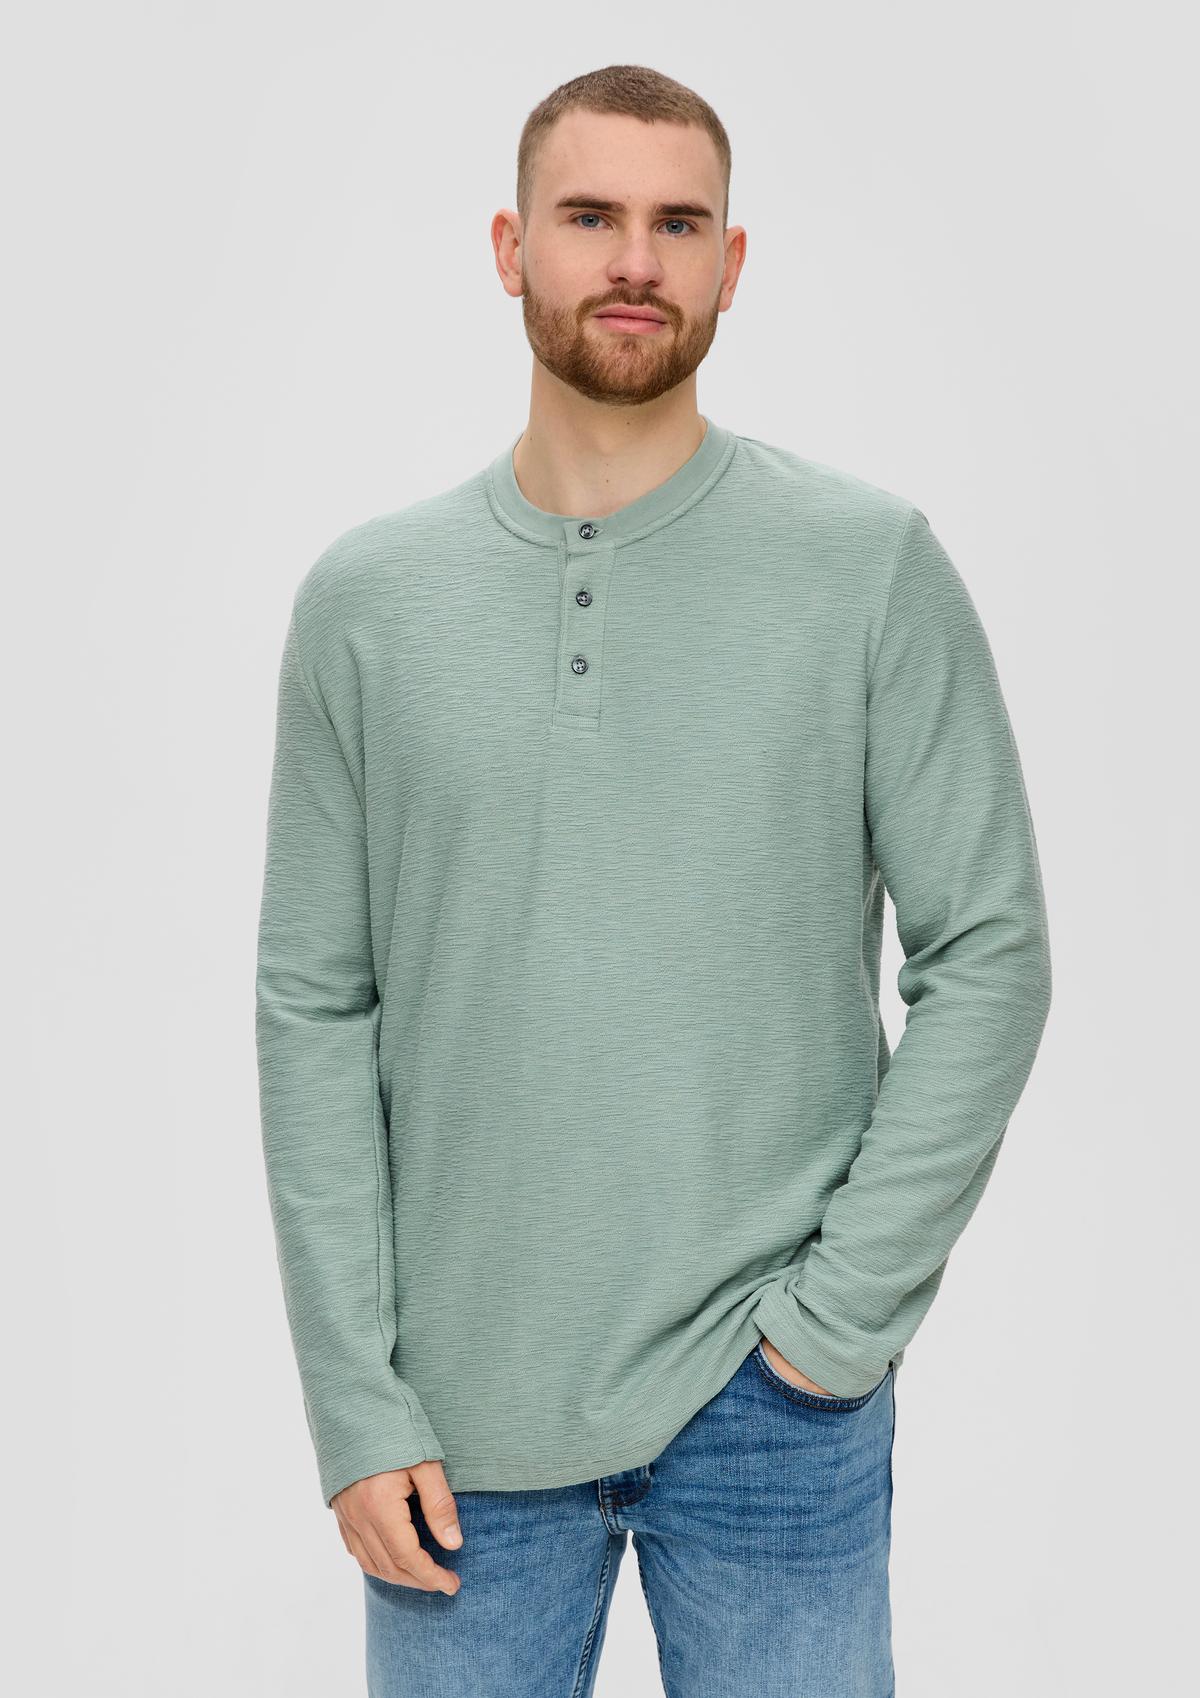 Long sleeve green - a sage with rolled hem top